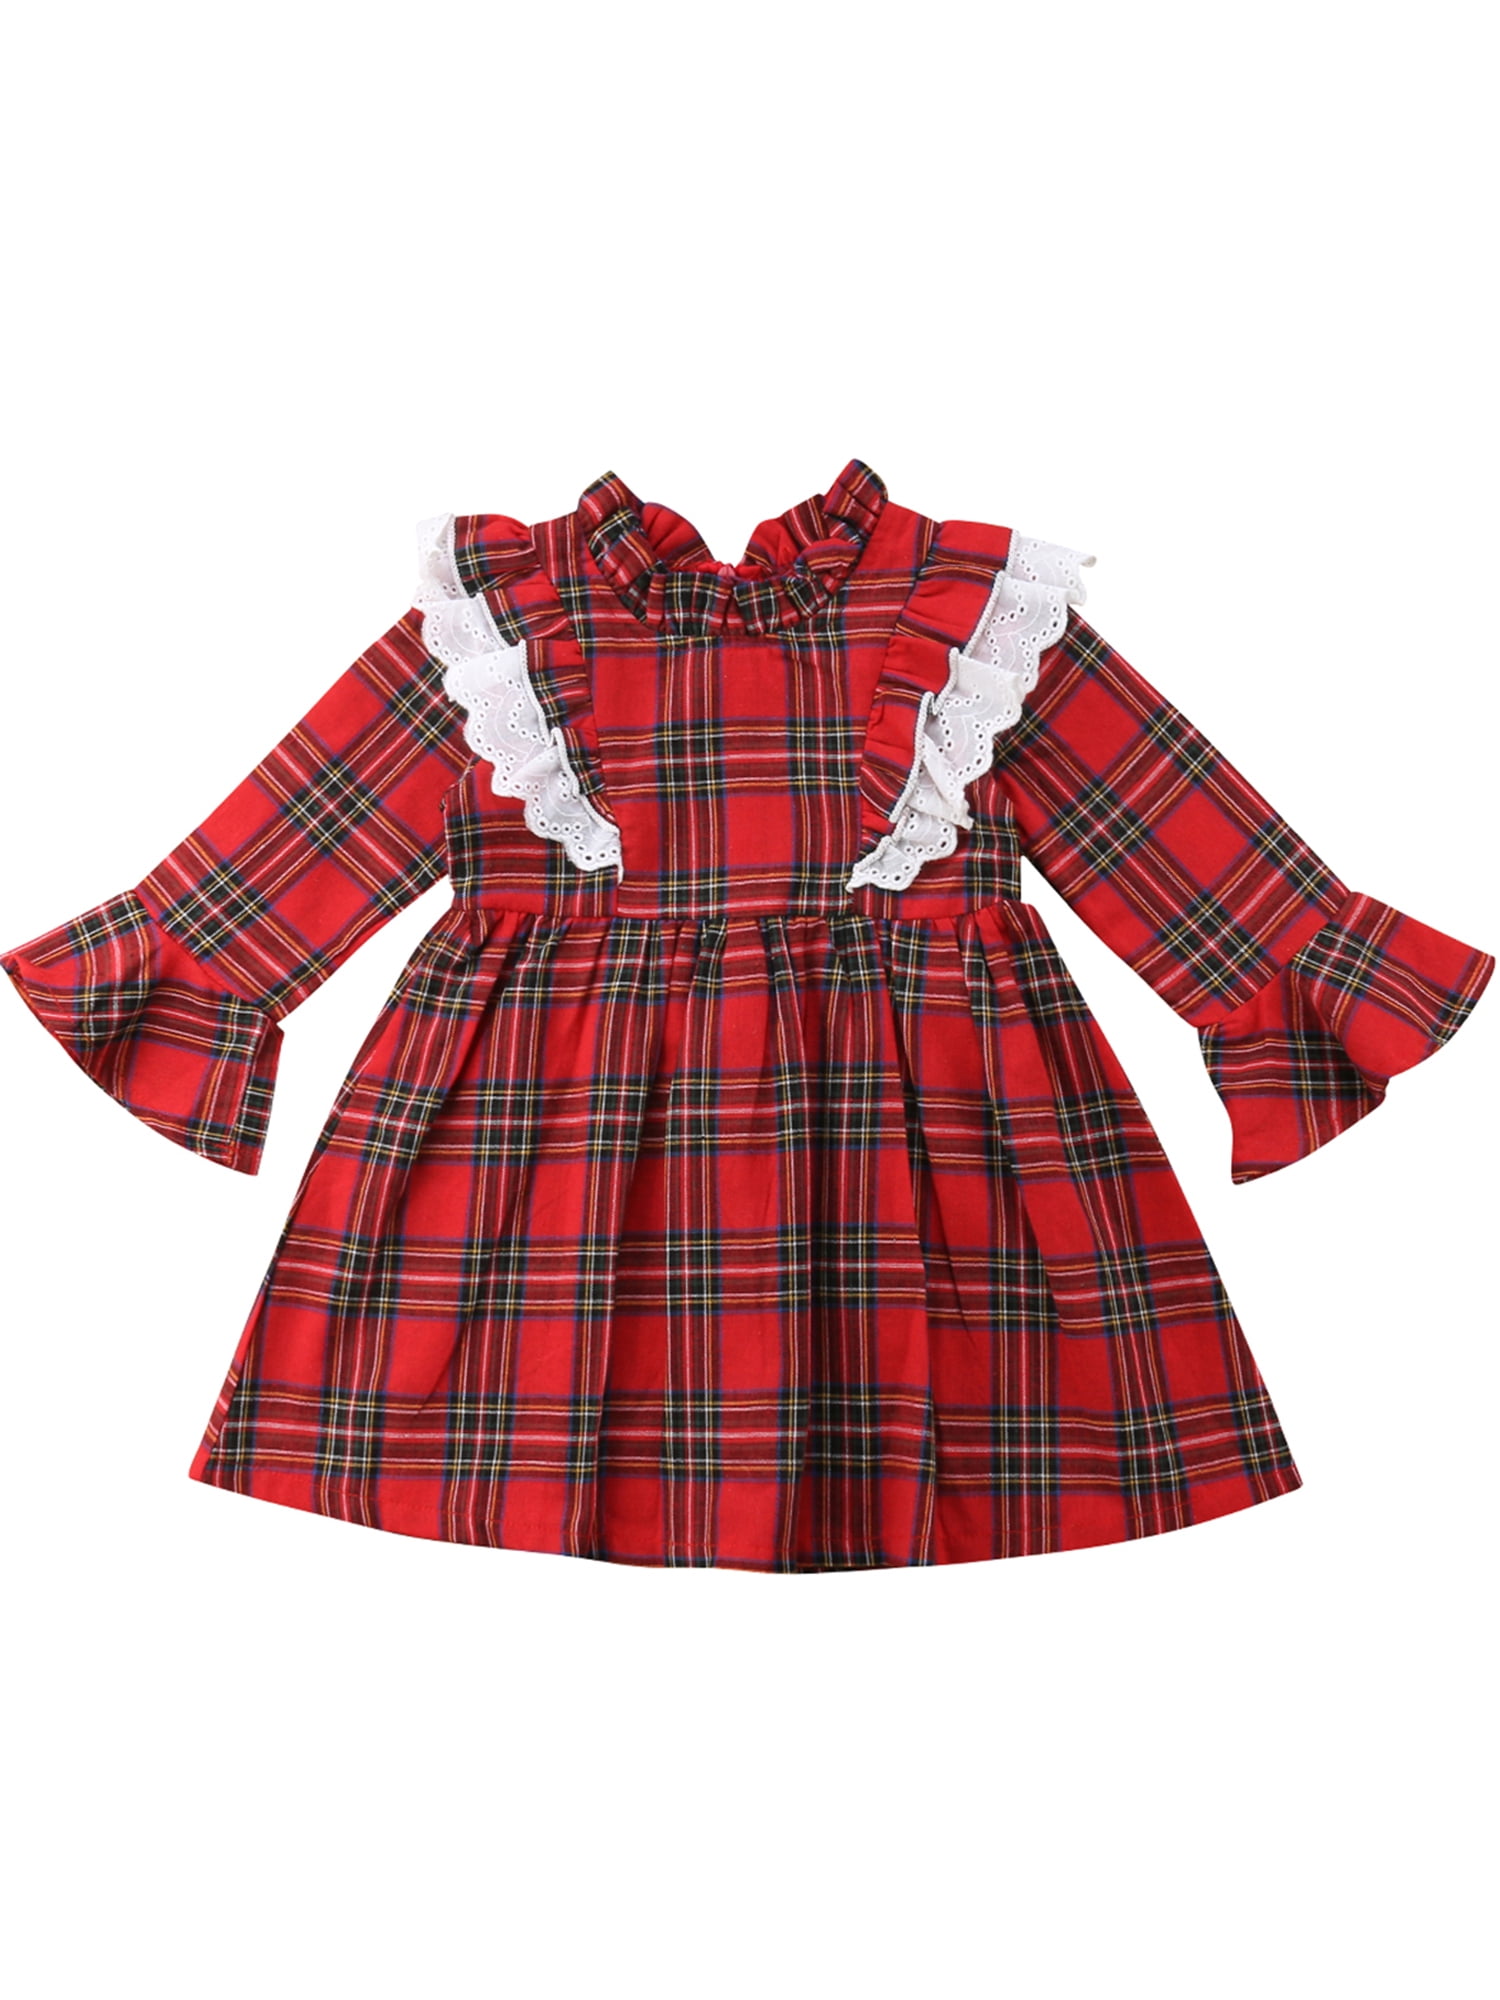 Details about   The Children's Place Red Plaid Christmas Dress Size 0-3 Months 